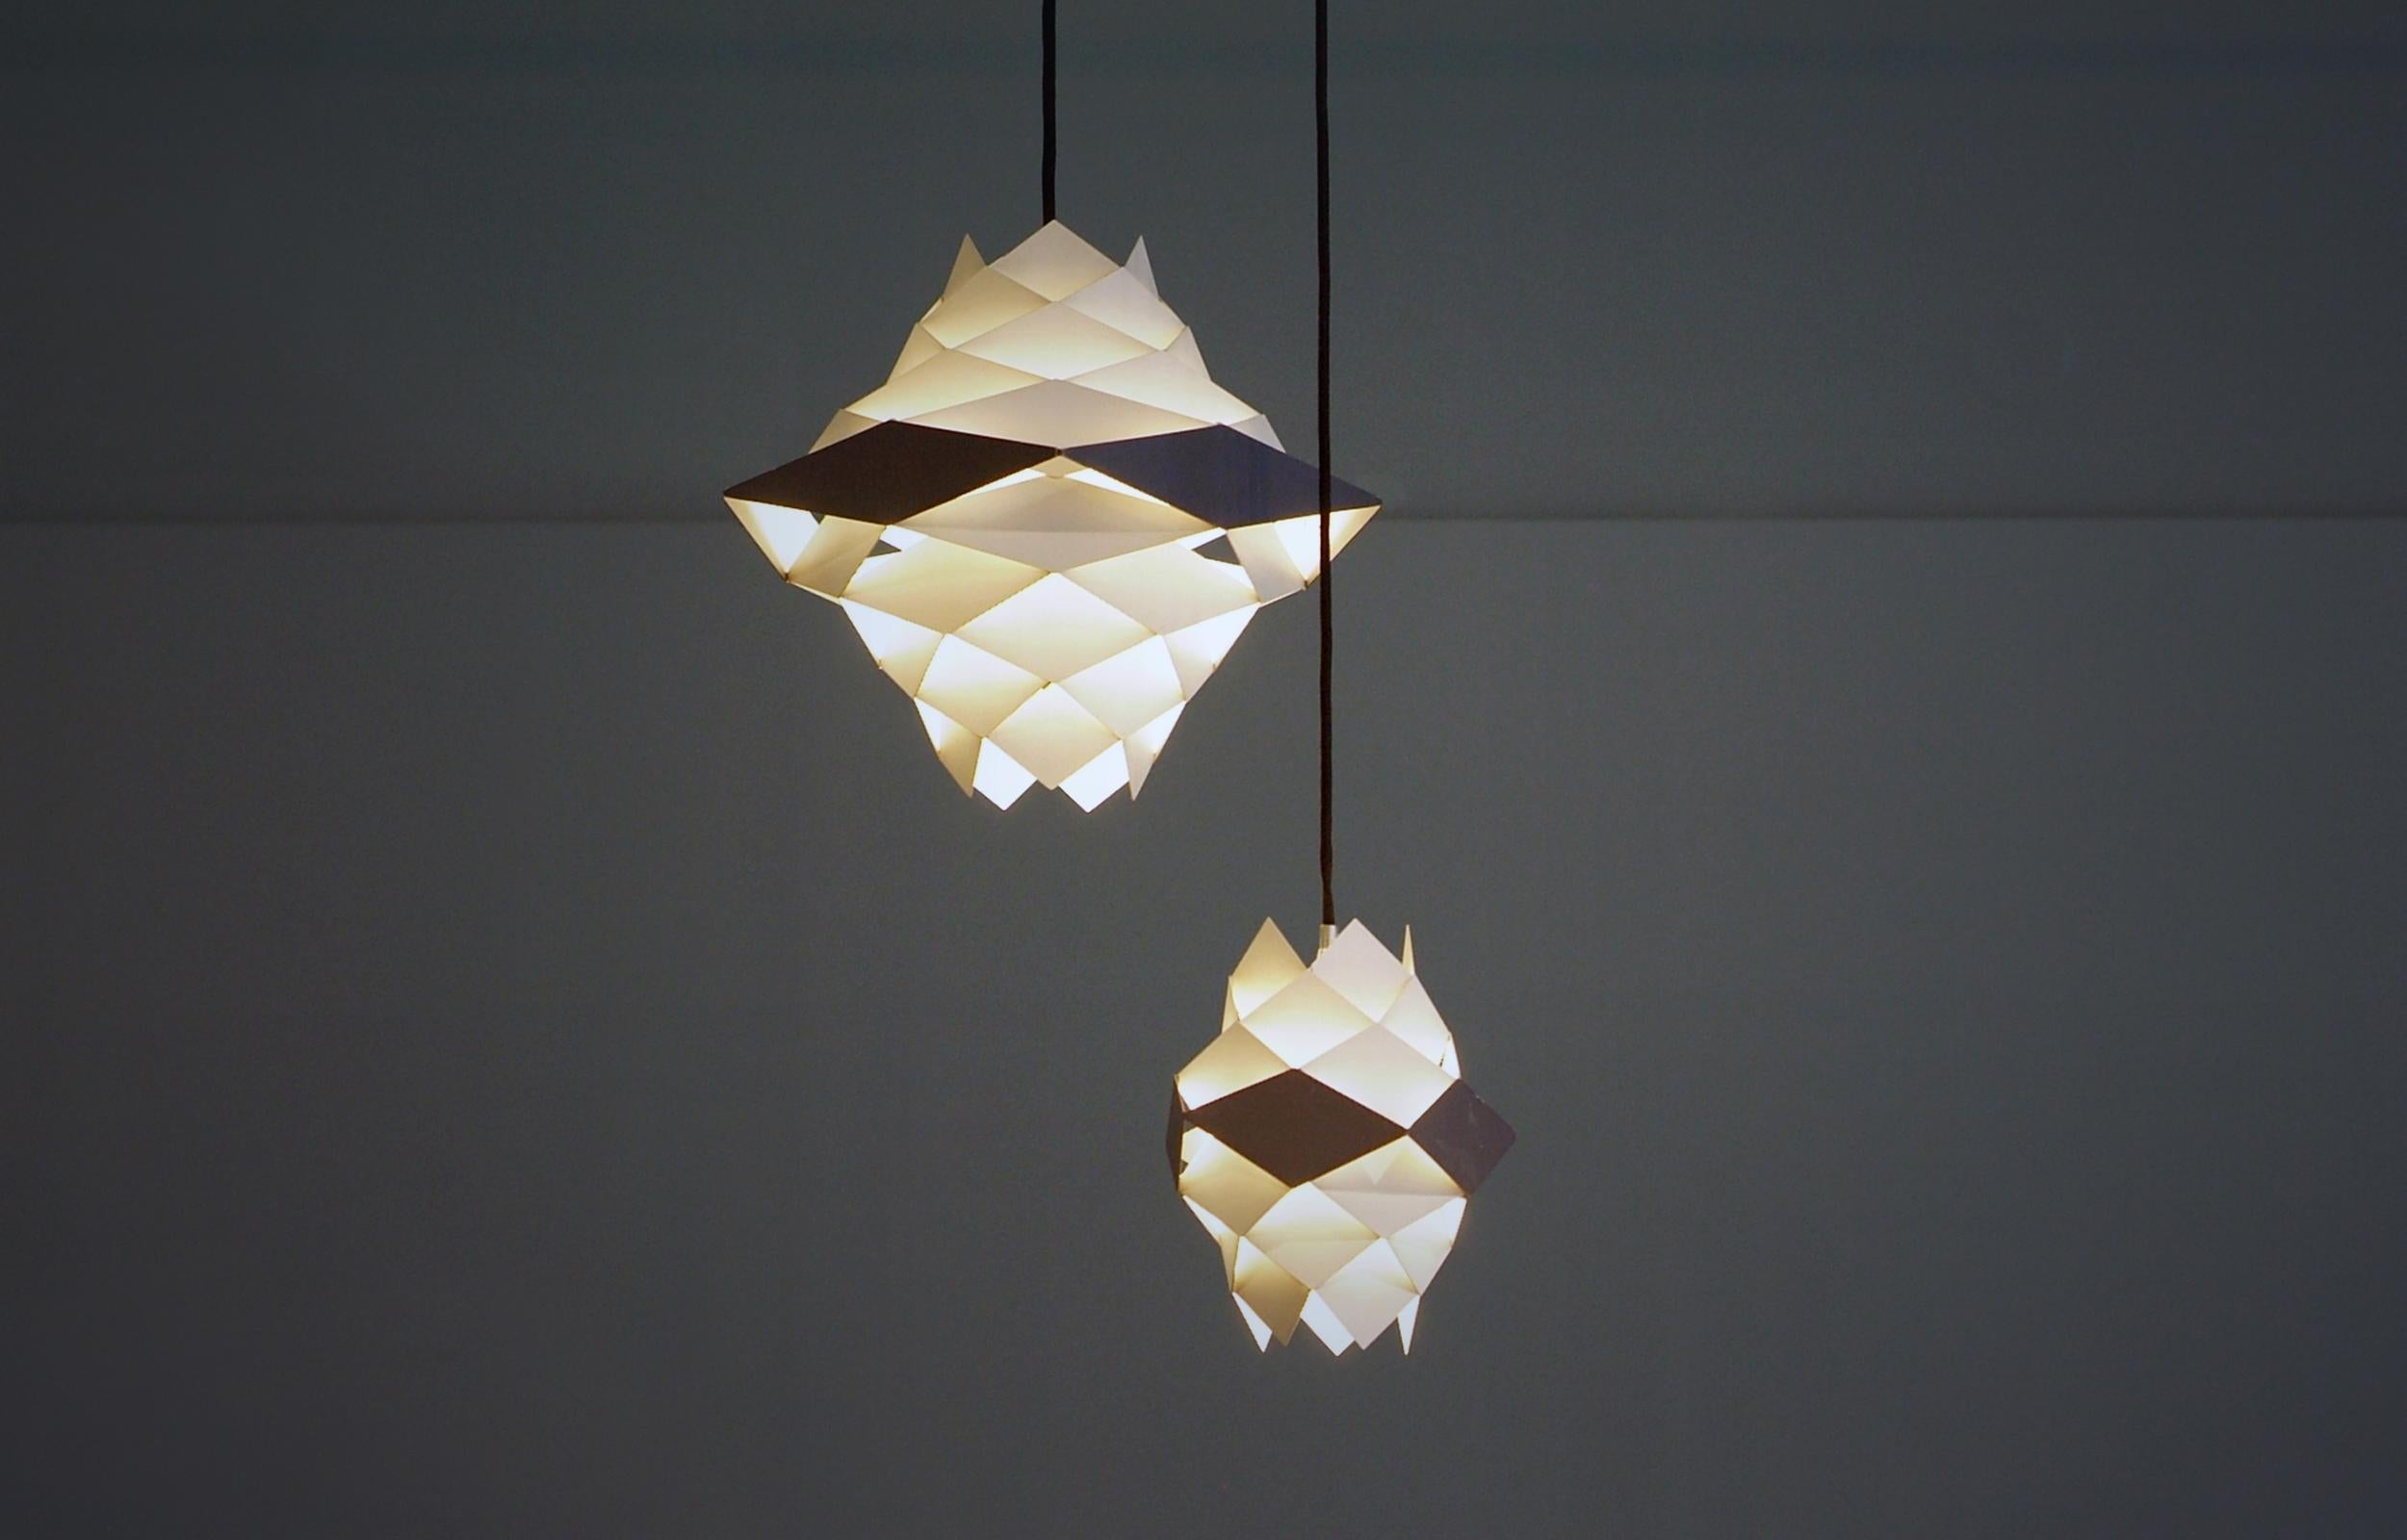 Beautiful pendant lightning Mod. Symfoni by Preben Dal for Hans Følsgaard AS, Denmark.
All original finish. 

Diffused light with a unique pattern. The fixture provides decorative and comfortable lighting.

Great vintage condition with normal wear